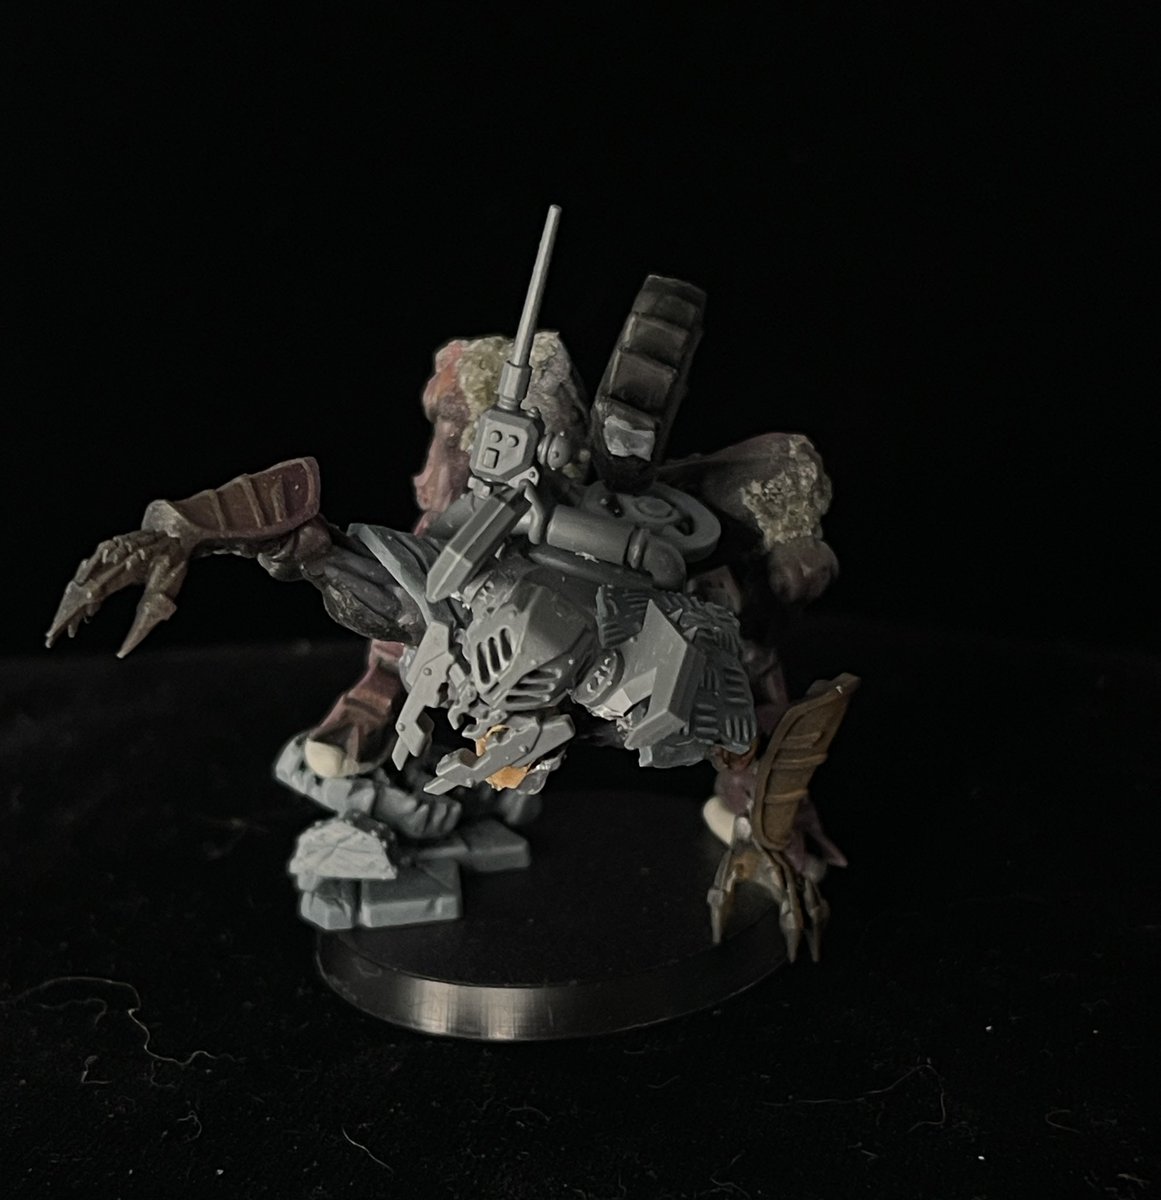 I’ve been #kitbashing every Weds on my stream and LOVING it. This is my latest creation for Flames of Orion; call sign Perverse Gear

It’s mecha may y’all! Show me your hot bots!! 

#miniaturepainting #hobby #minipainting #warhammer